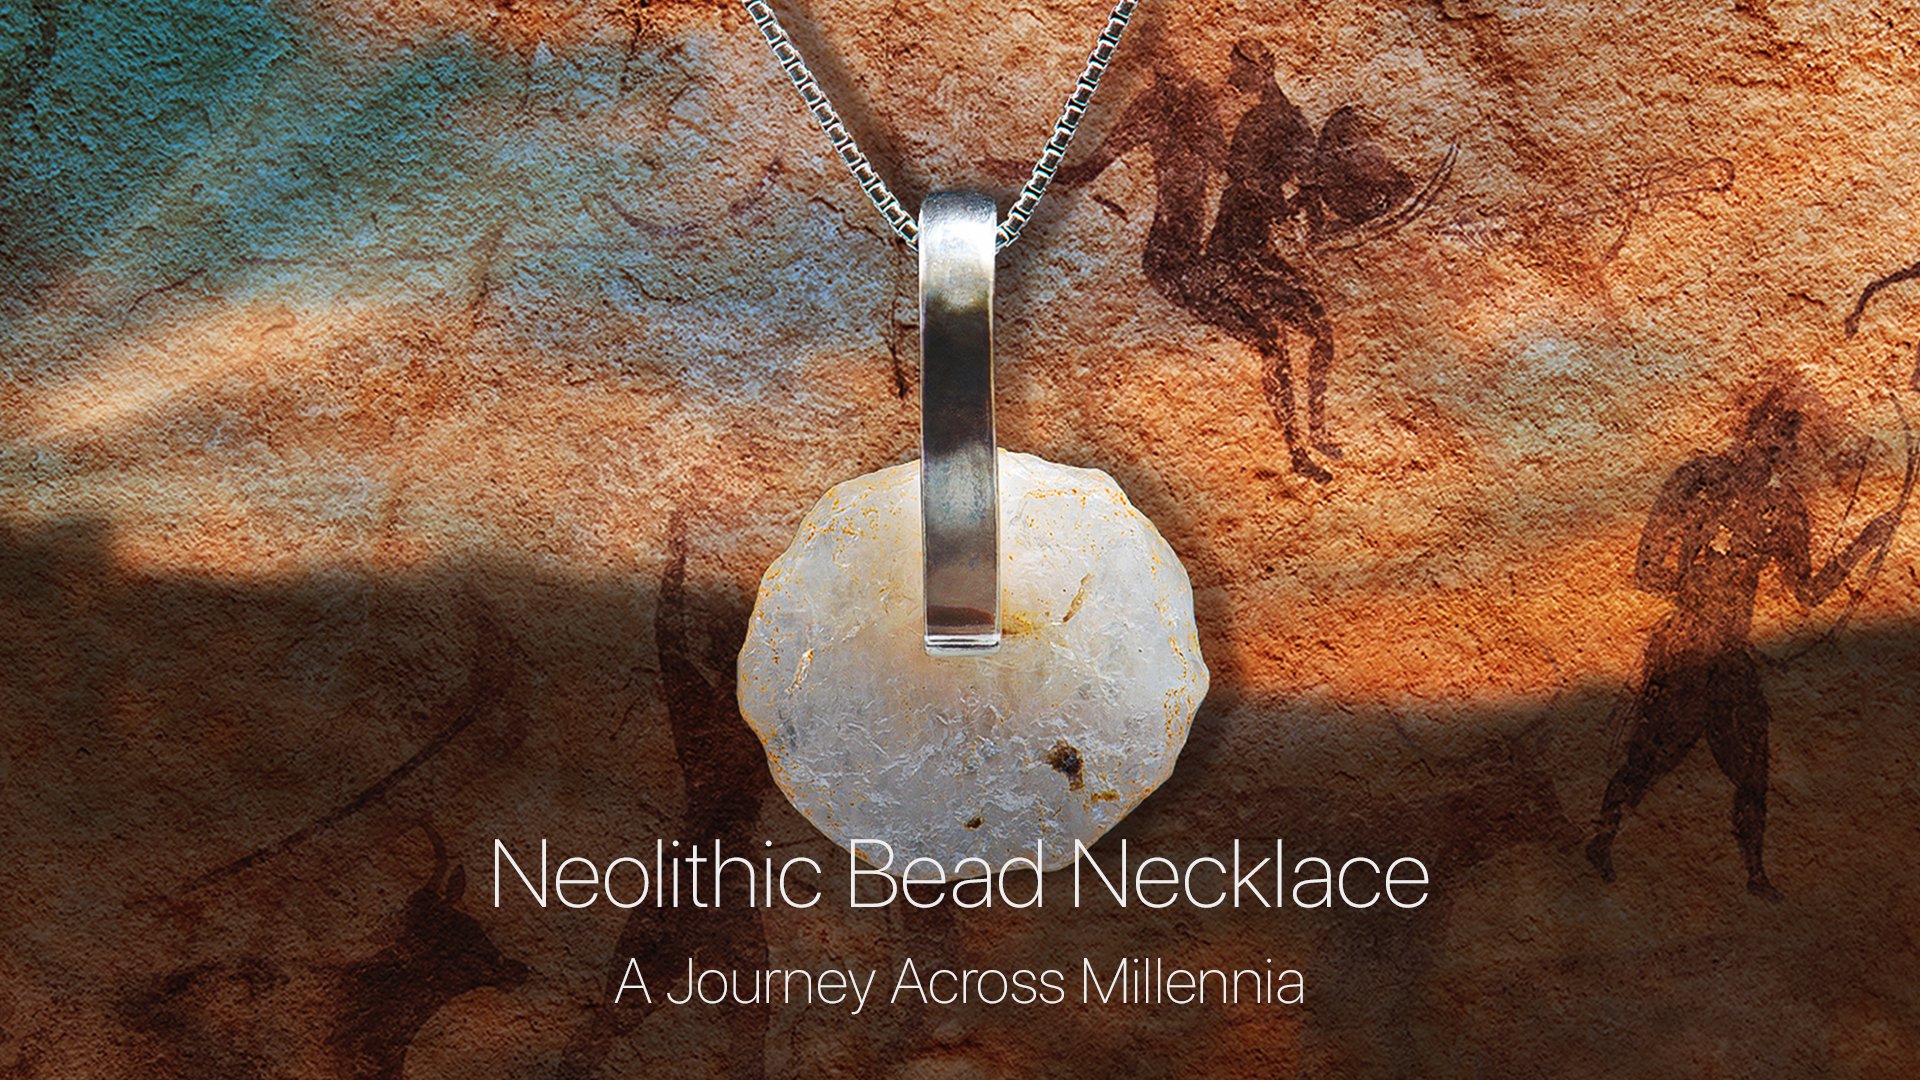 Neolithic Bead Necklace - A Journey Across Millennia